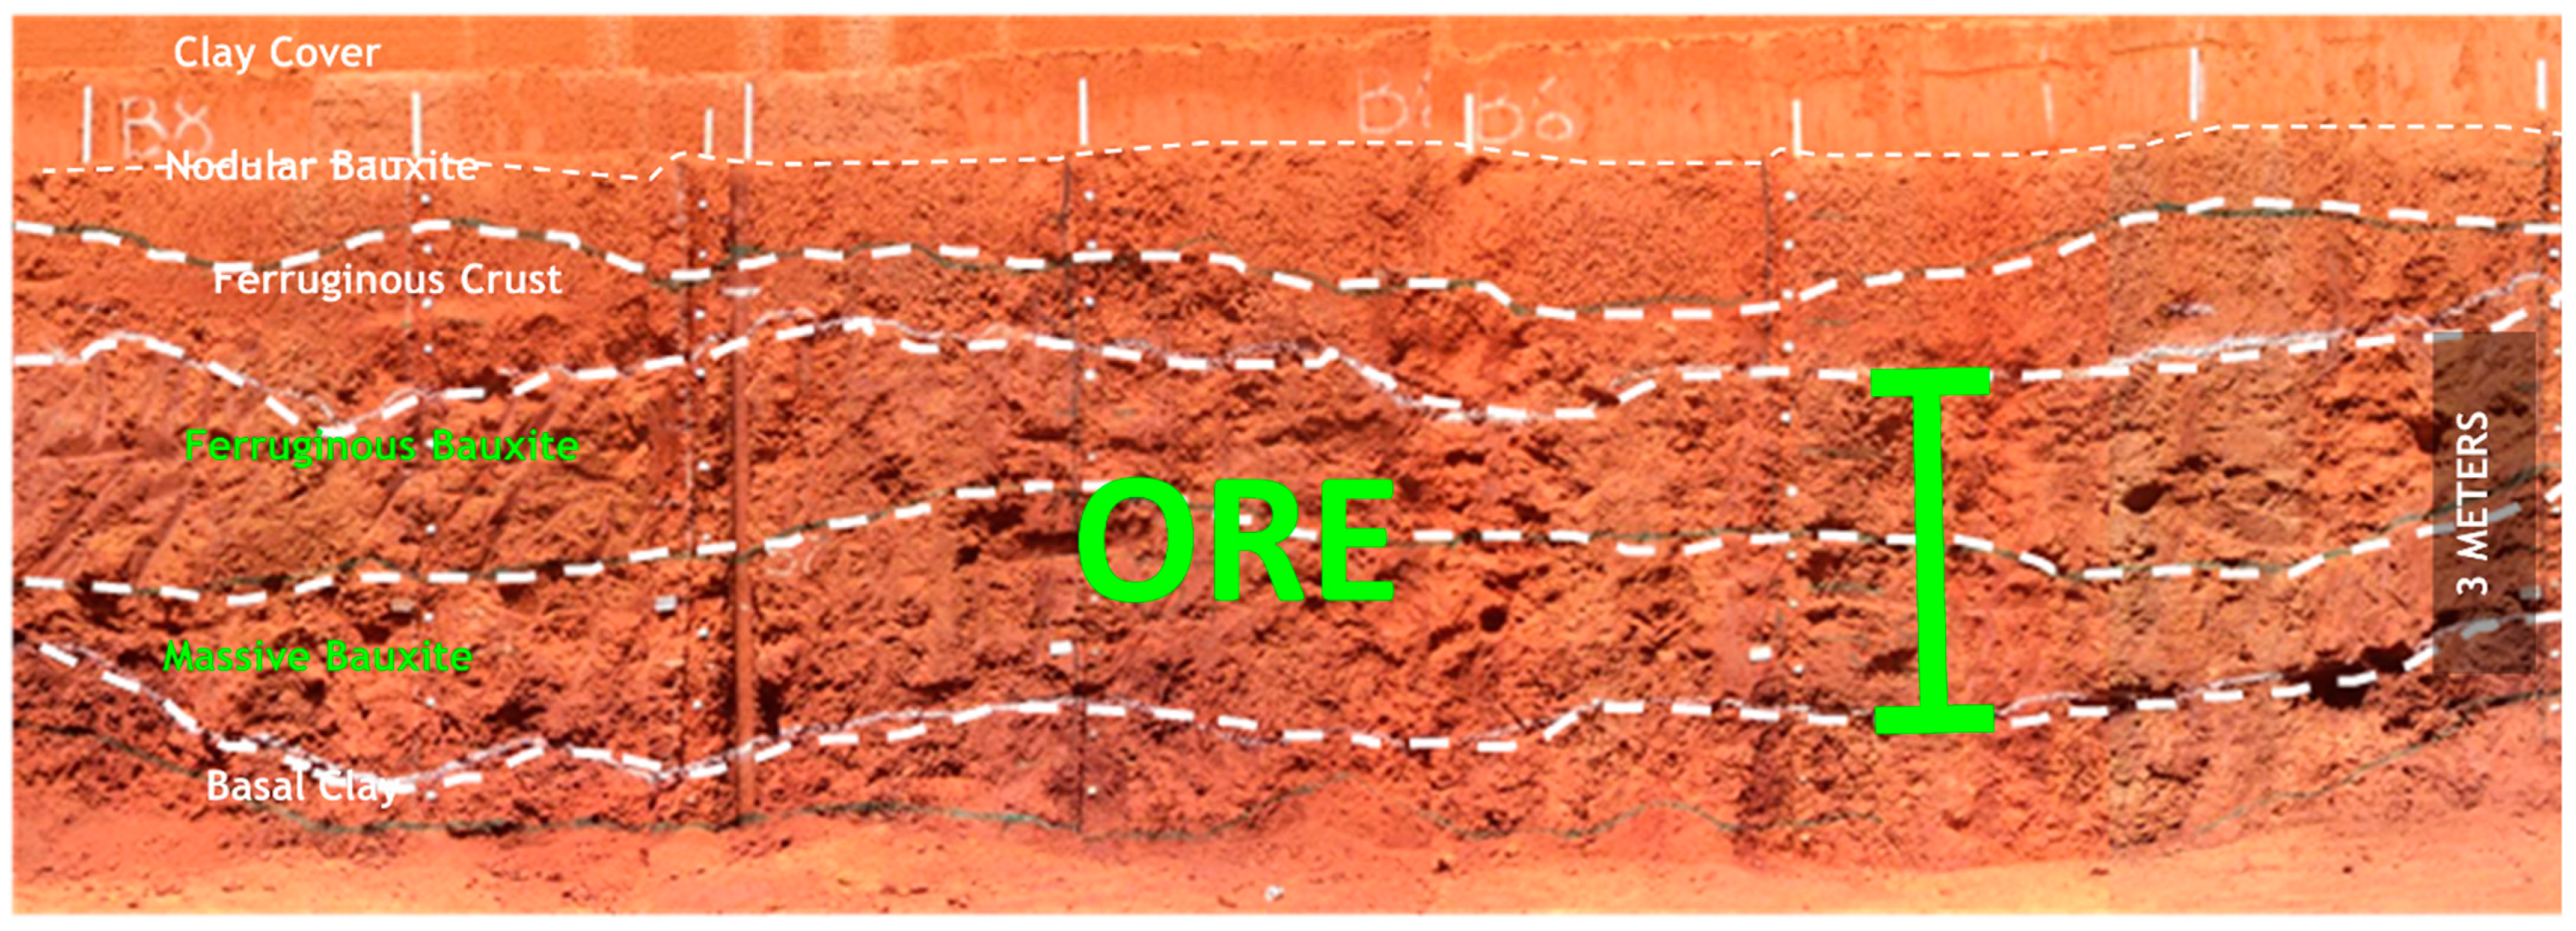 Mining | Free Full-Text | Application of Volume Uncertainty for Resource Classification: A Case Study on the Rondon Do Par&aacute; Bauxite Deposit, Brazil